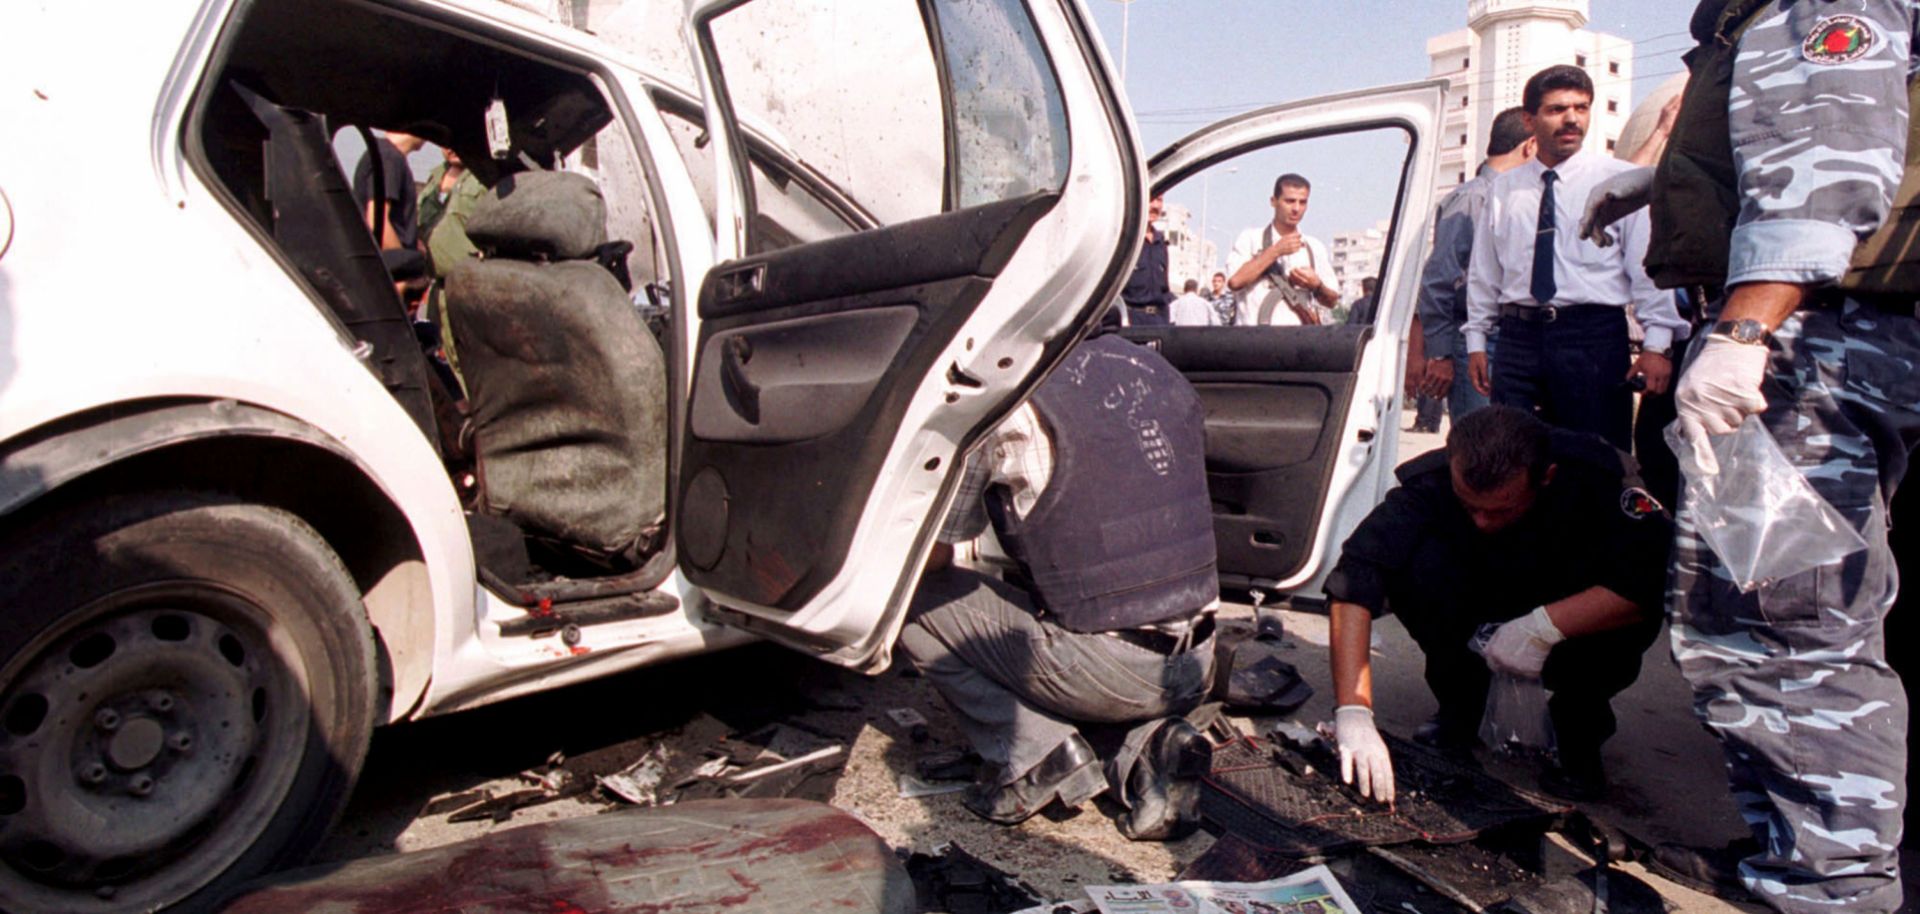 Senior Palestinian Security Official Killed In Car Bombing